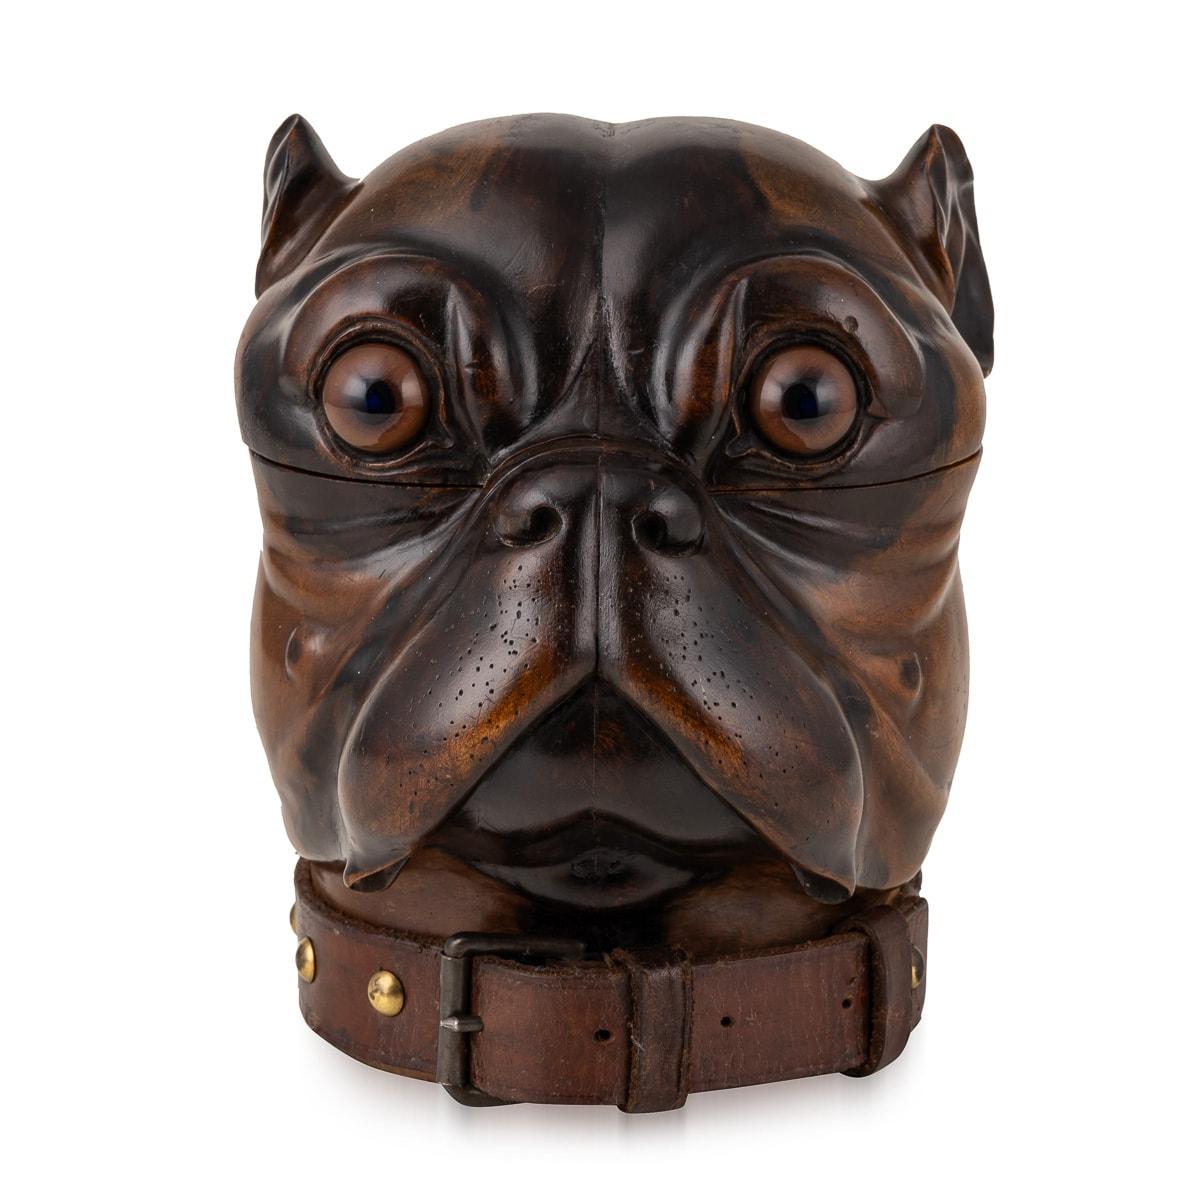 Antique 19th Century Victorian lignum vitae tobacco jar carved in the form of a bulldog head. The detail is of exceptional quality, featuring glass eyes and a leather collar around the base. A truly wonderful piece and a must desk accessory for a